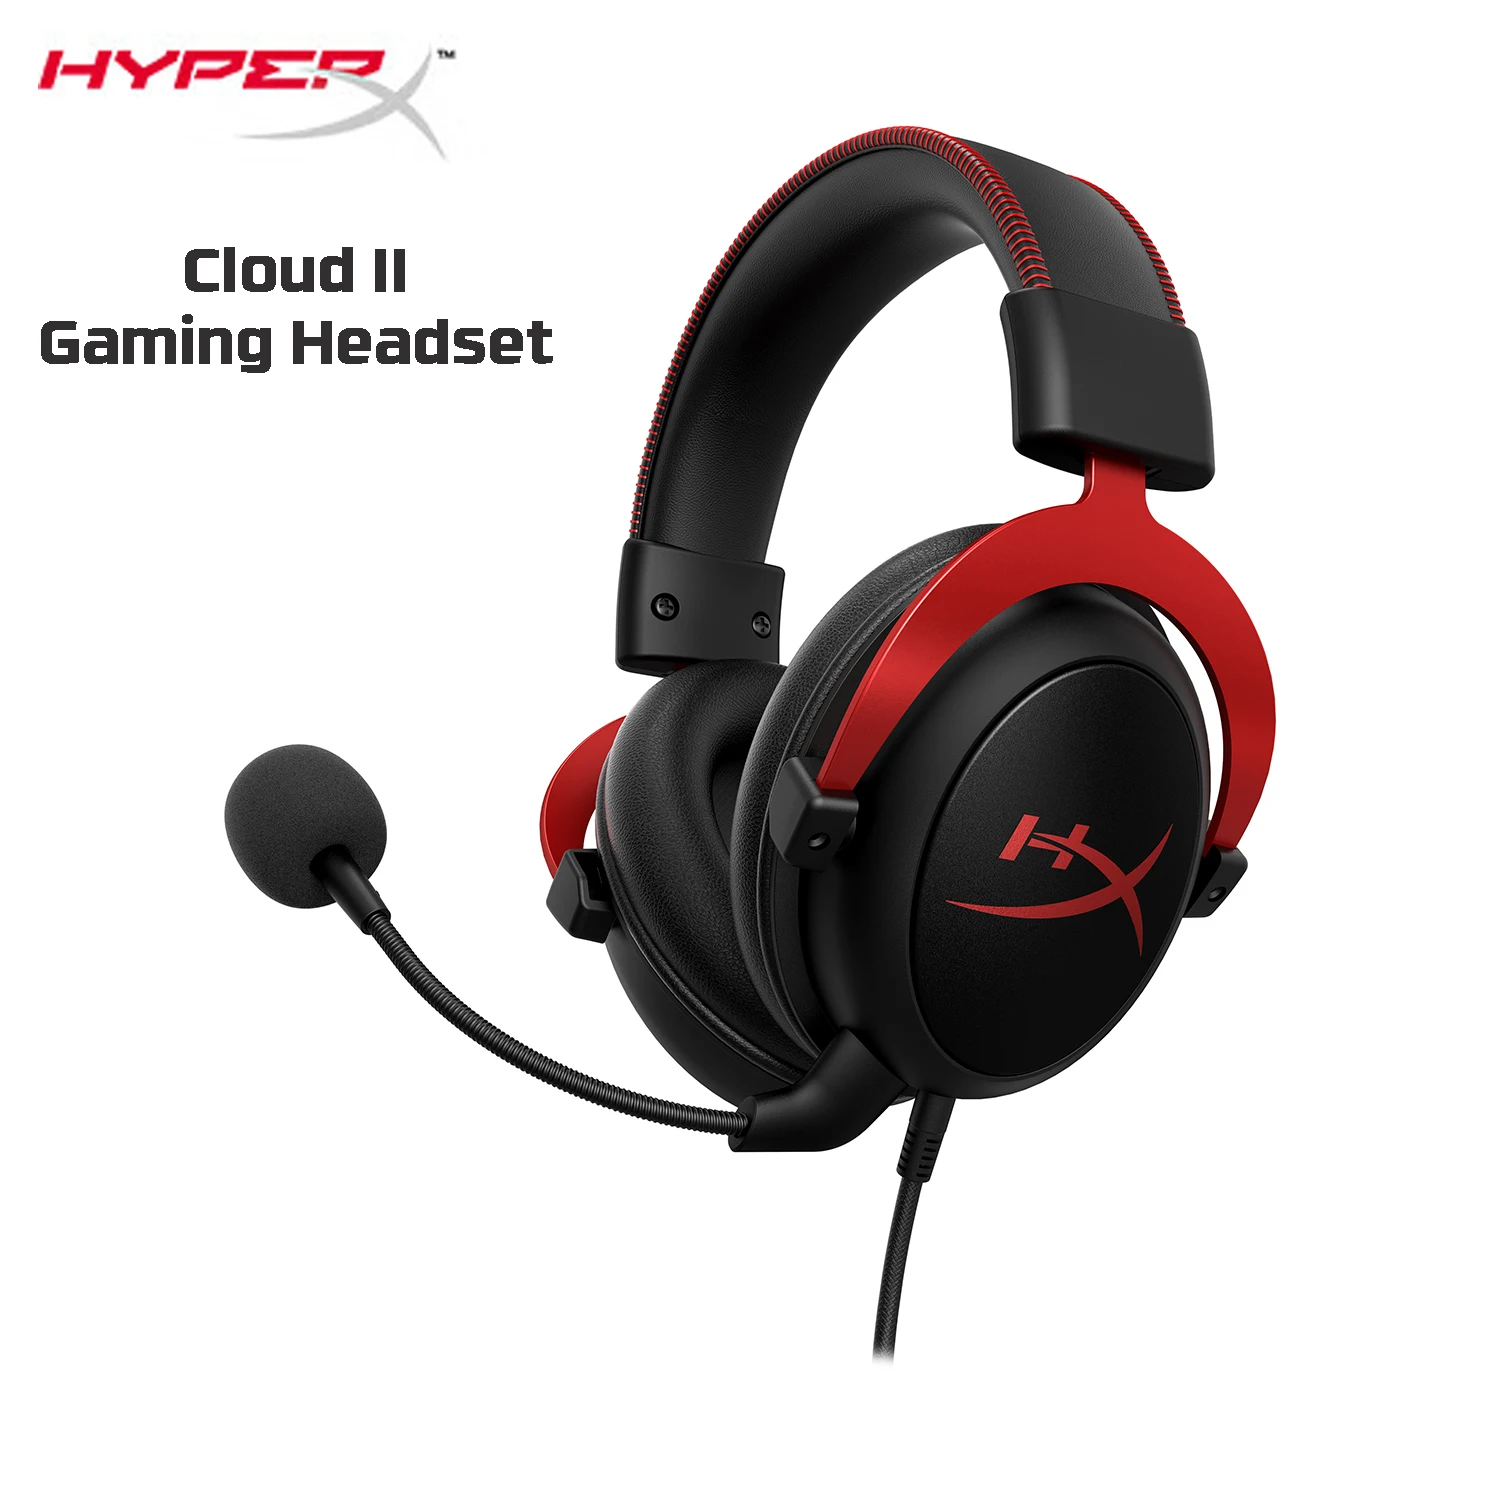 

HyperX Cloud II Wired Hi-Fi Gaming Headset Detachable Microphone Works with PC/PS5/PS4/Nintendo Switch/Xbox One/X|S